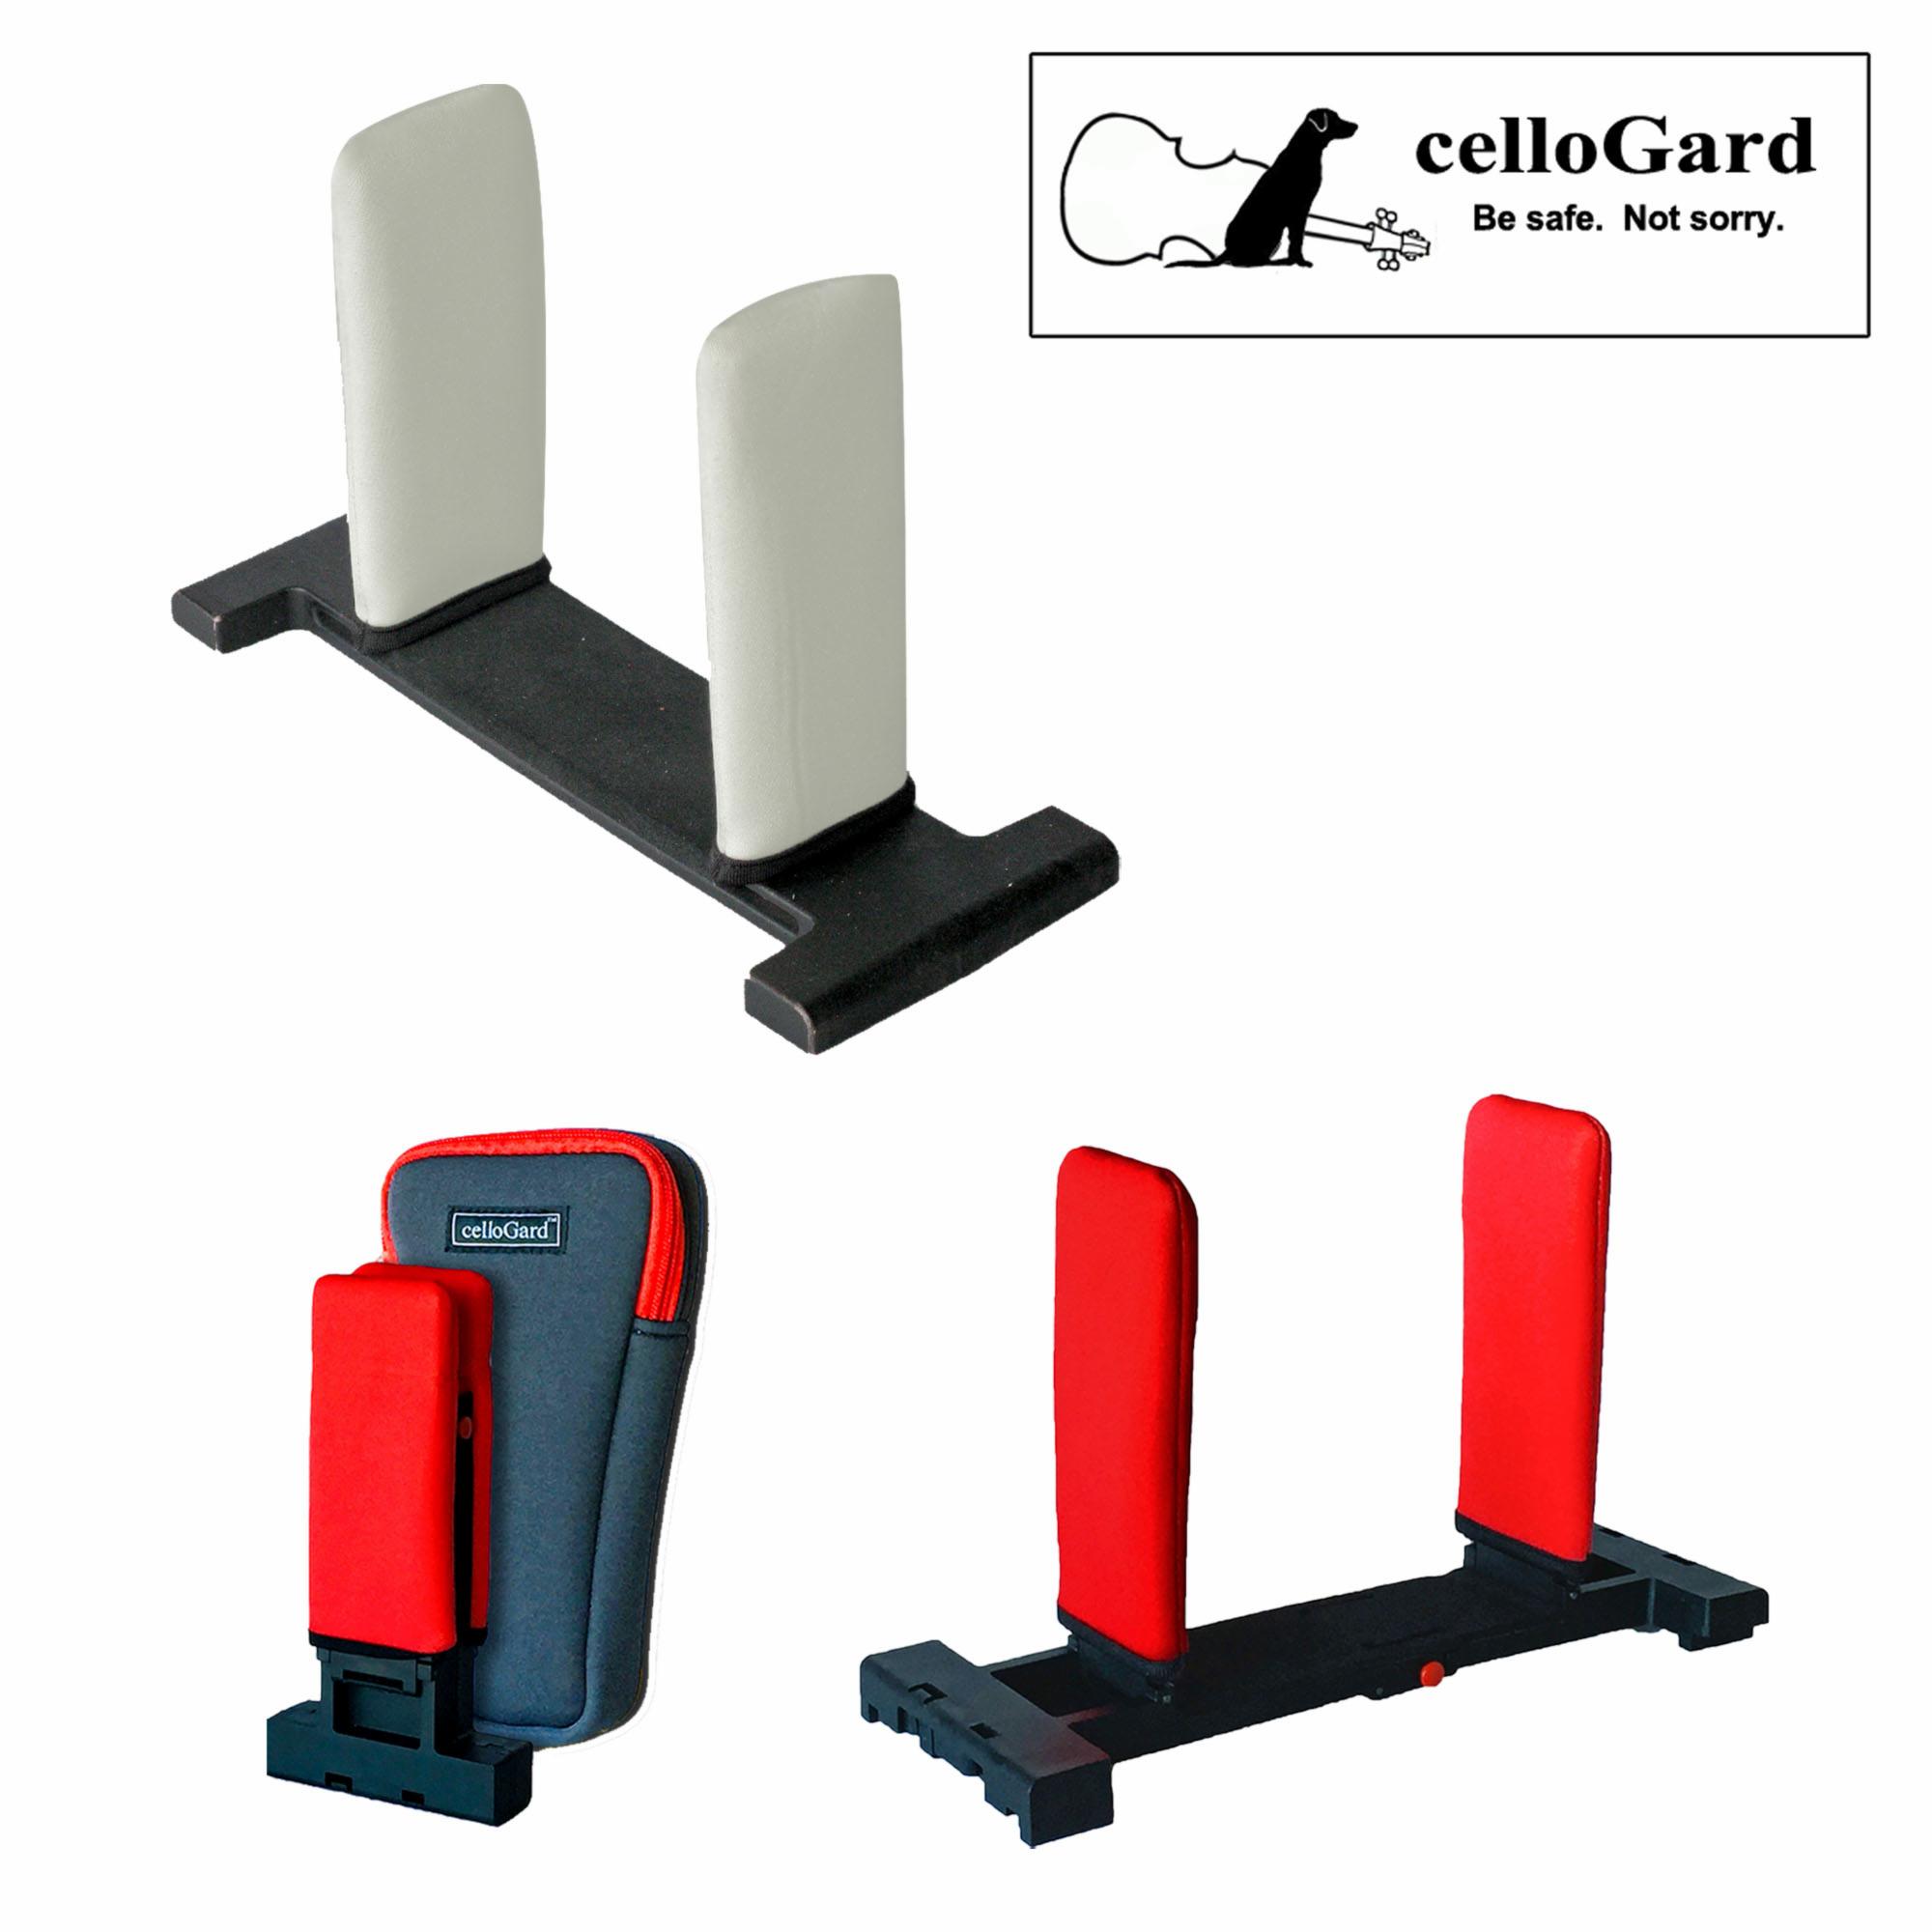 celloGard Model One and Foldable Cello Instrument Stand